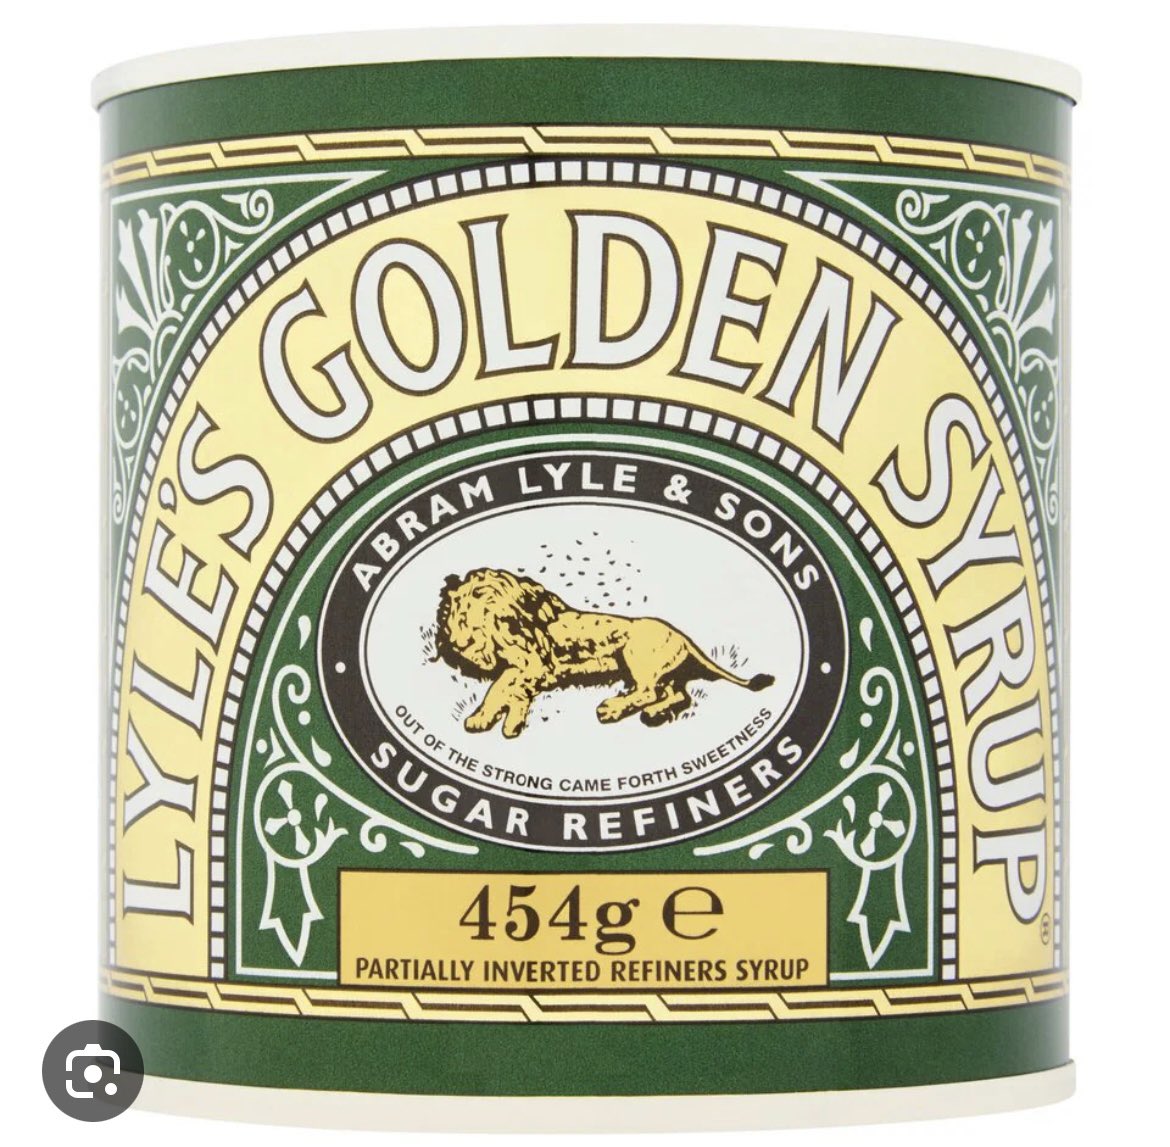 How old were you until you realised this famous logo is a dead rotten lion surrounded by flies 😮 mines today aged 51 🤷🏻‍♂️